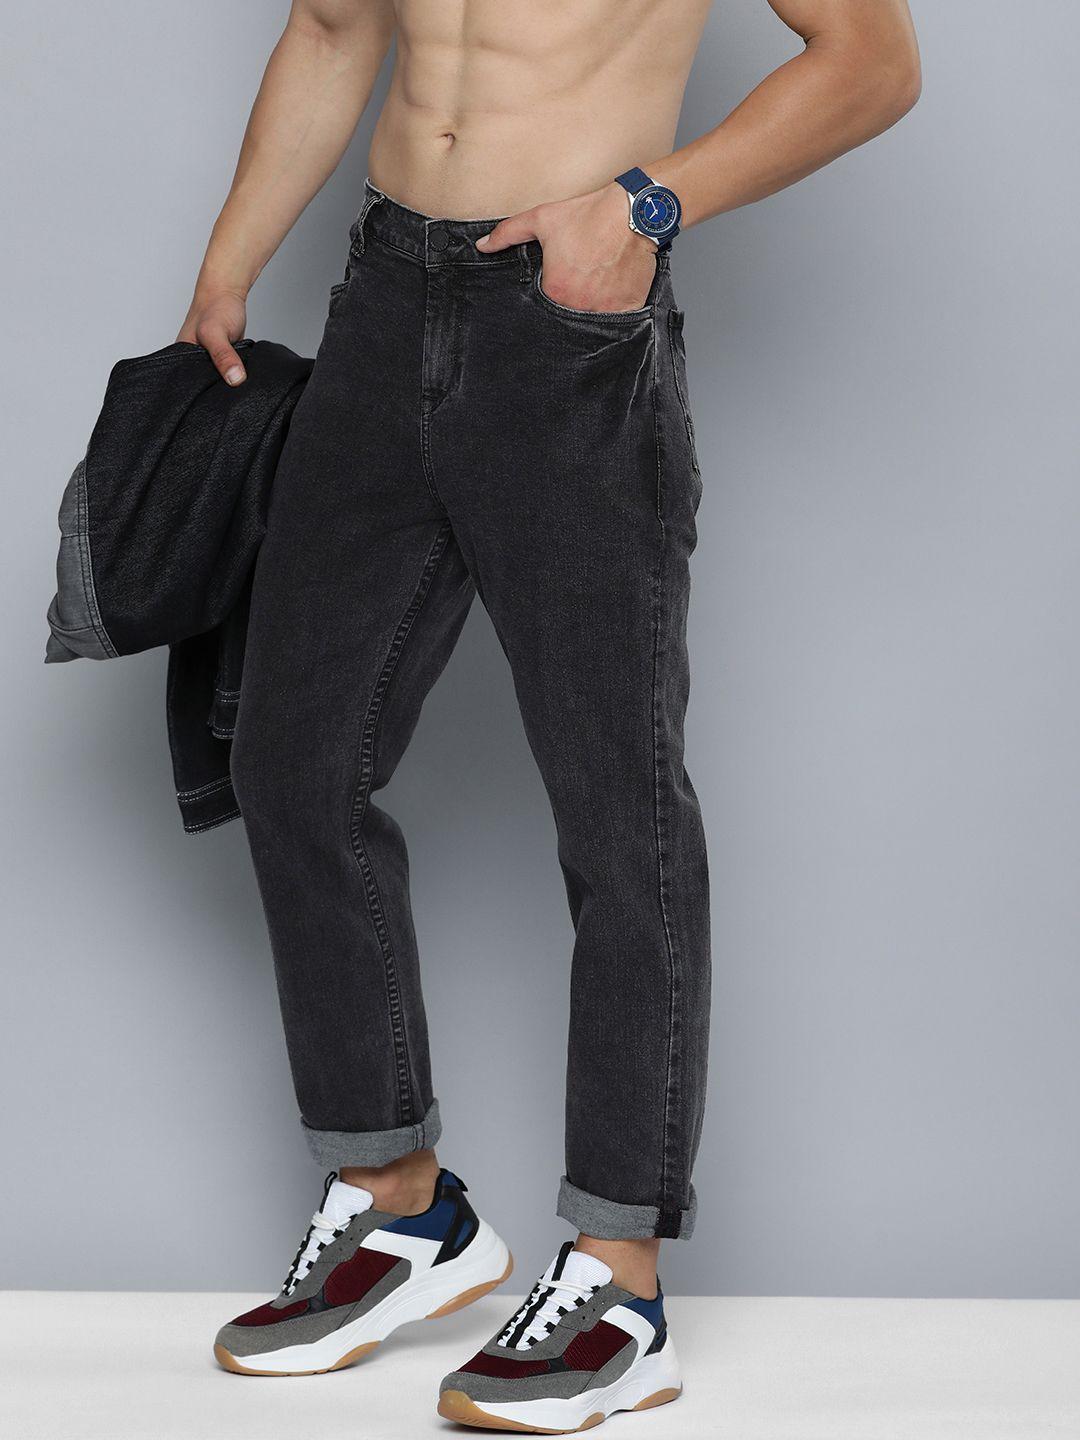 here&now-men-regular-fit-light-fade-stretchable-mid-rise-jeans